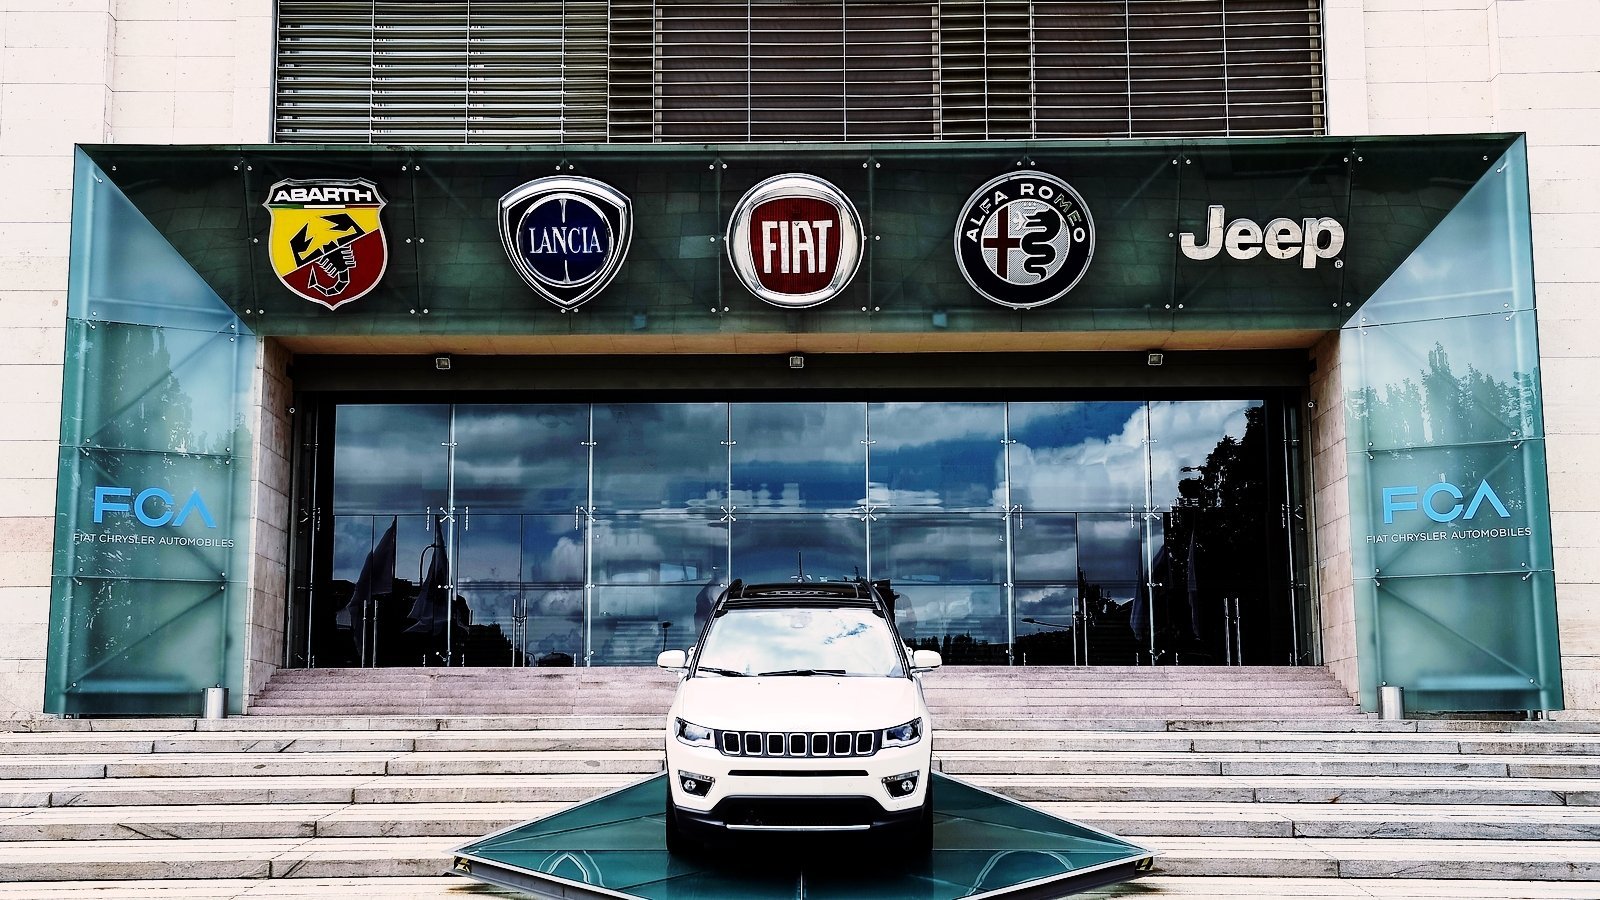 Founded in year 1899, Fiat a 117 year old company that was founded by Giovanni Agnelli, in Turin northern Italy. Over the years, this corporate has marked a dominating presence worldwide in Automobile manufacturing.